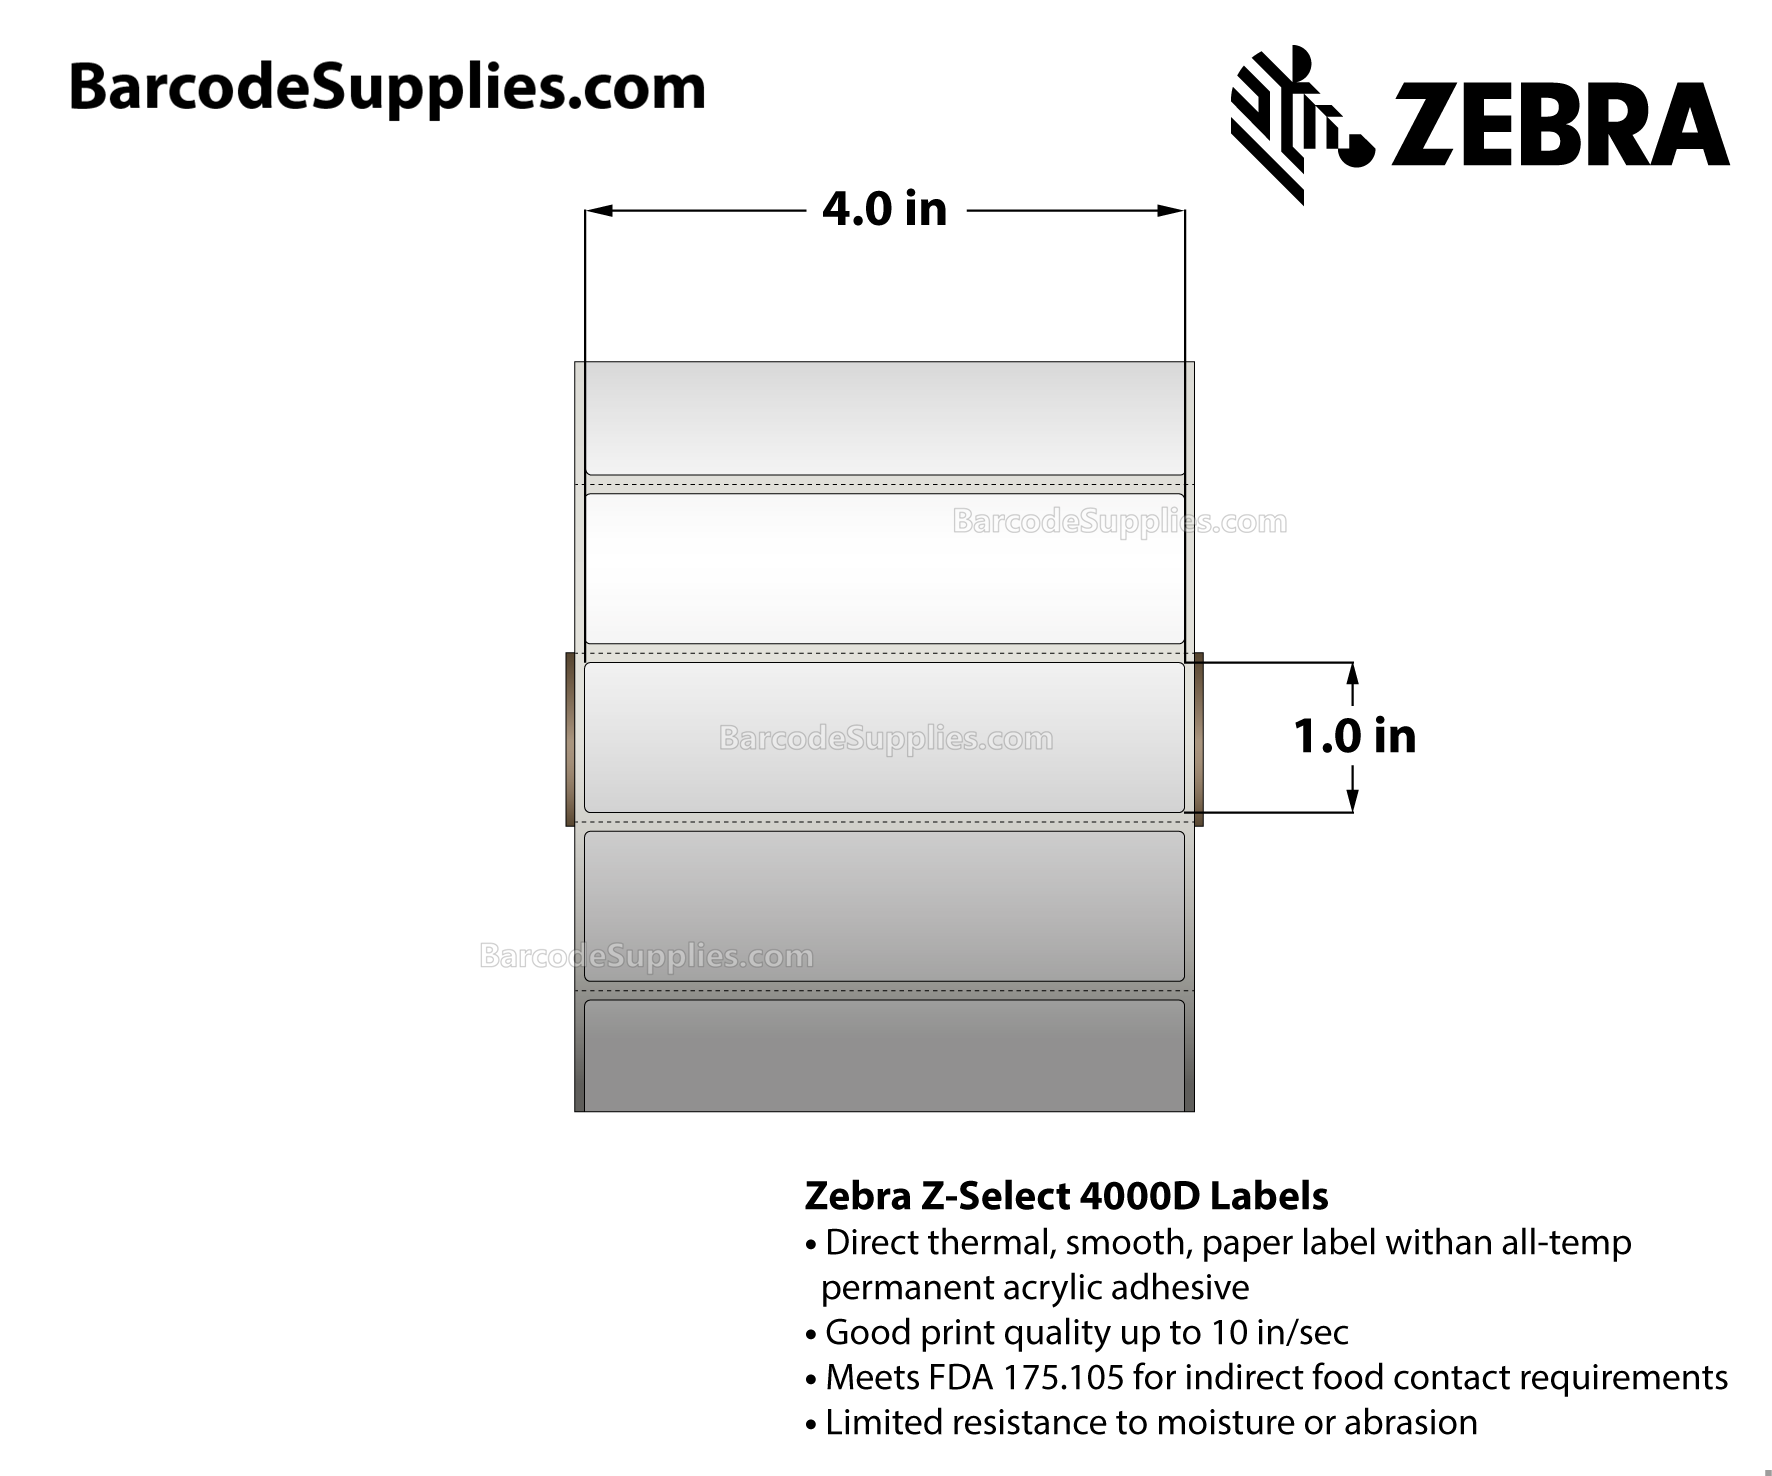 4 x 1 Direct Thermal White Z-Select 4000D Labels With All-Temp Adhesive - Perforated - 2340 Labels Per Roll - Carton Of 6 Rolls - 14040 Labels Total - MPN: 10010045